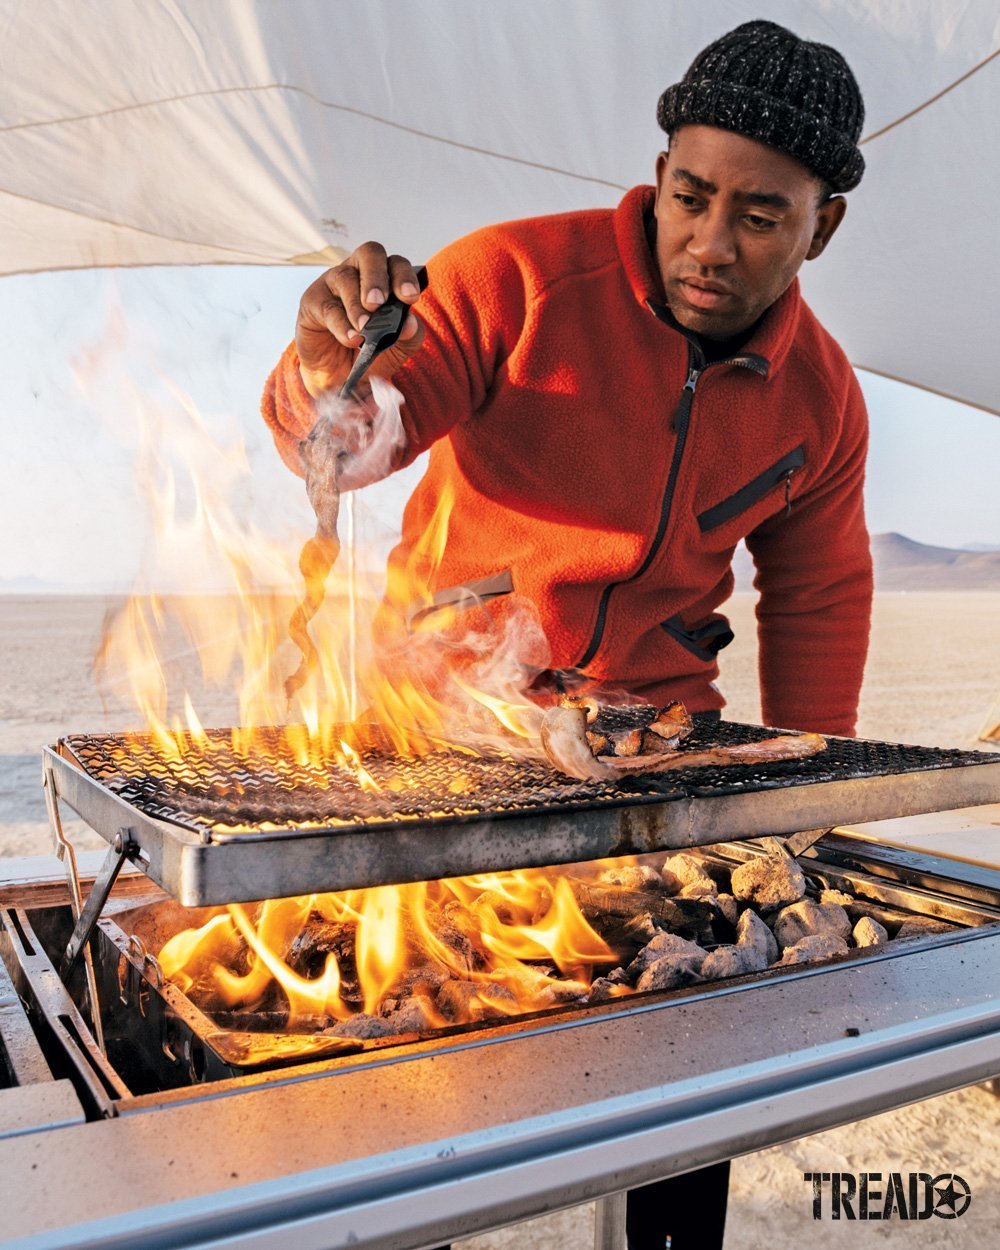 Frazier, earing an orange fleece from Camp Yoshi, cooks bacon over an elevated fire grill.